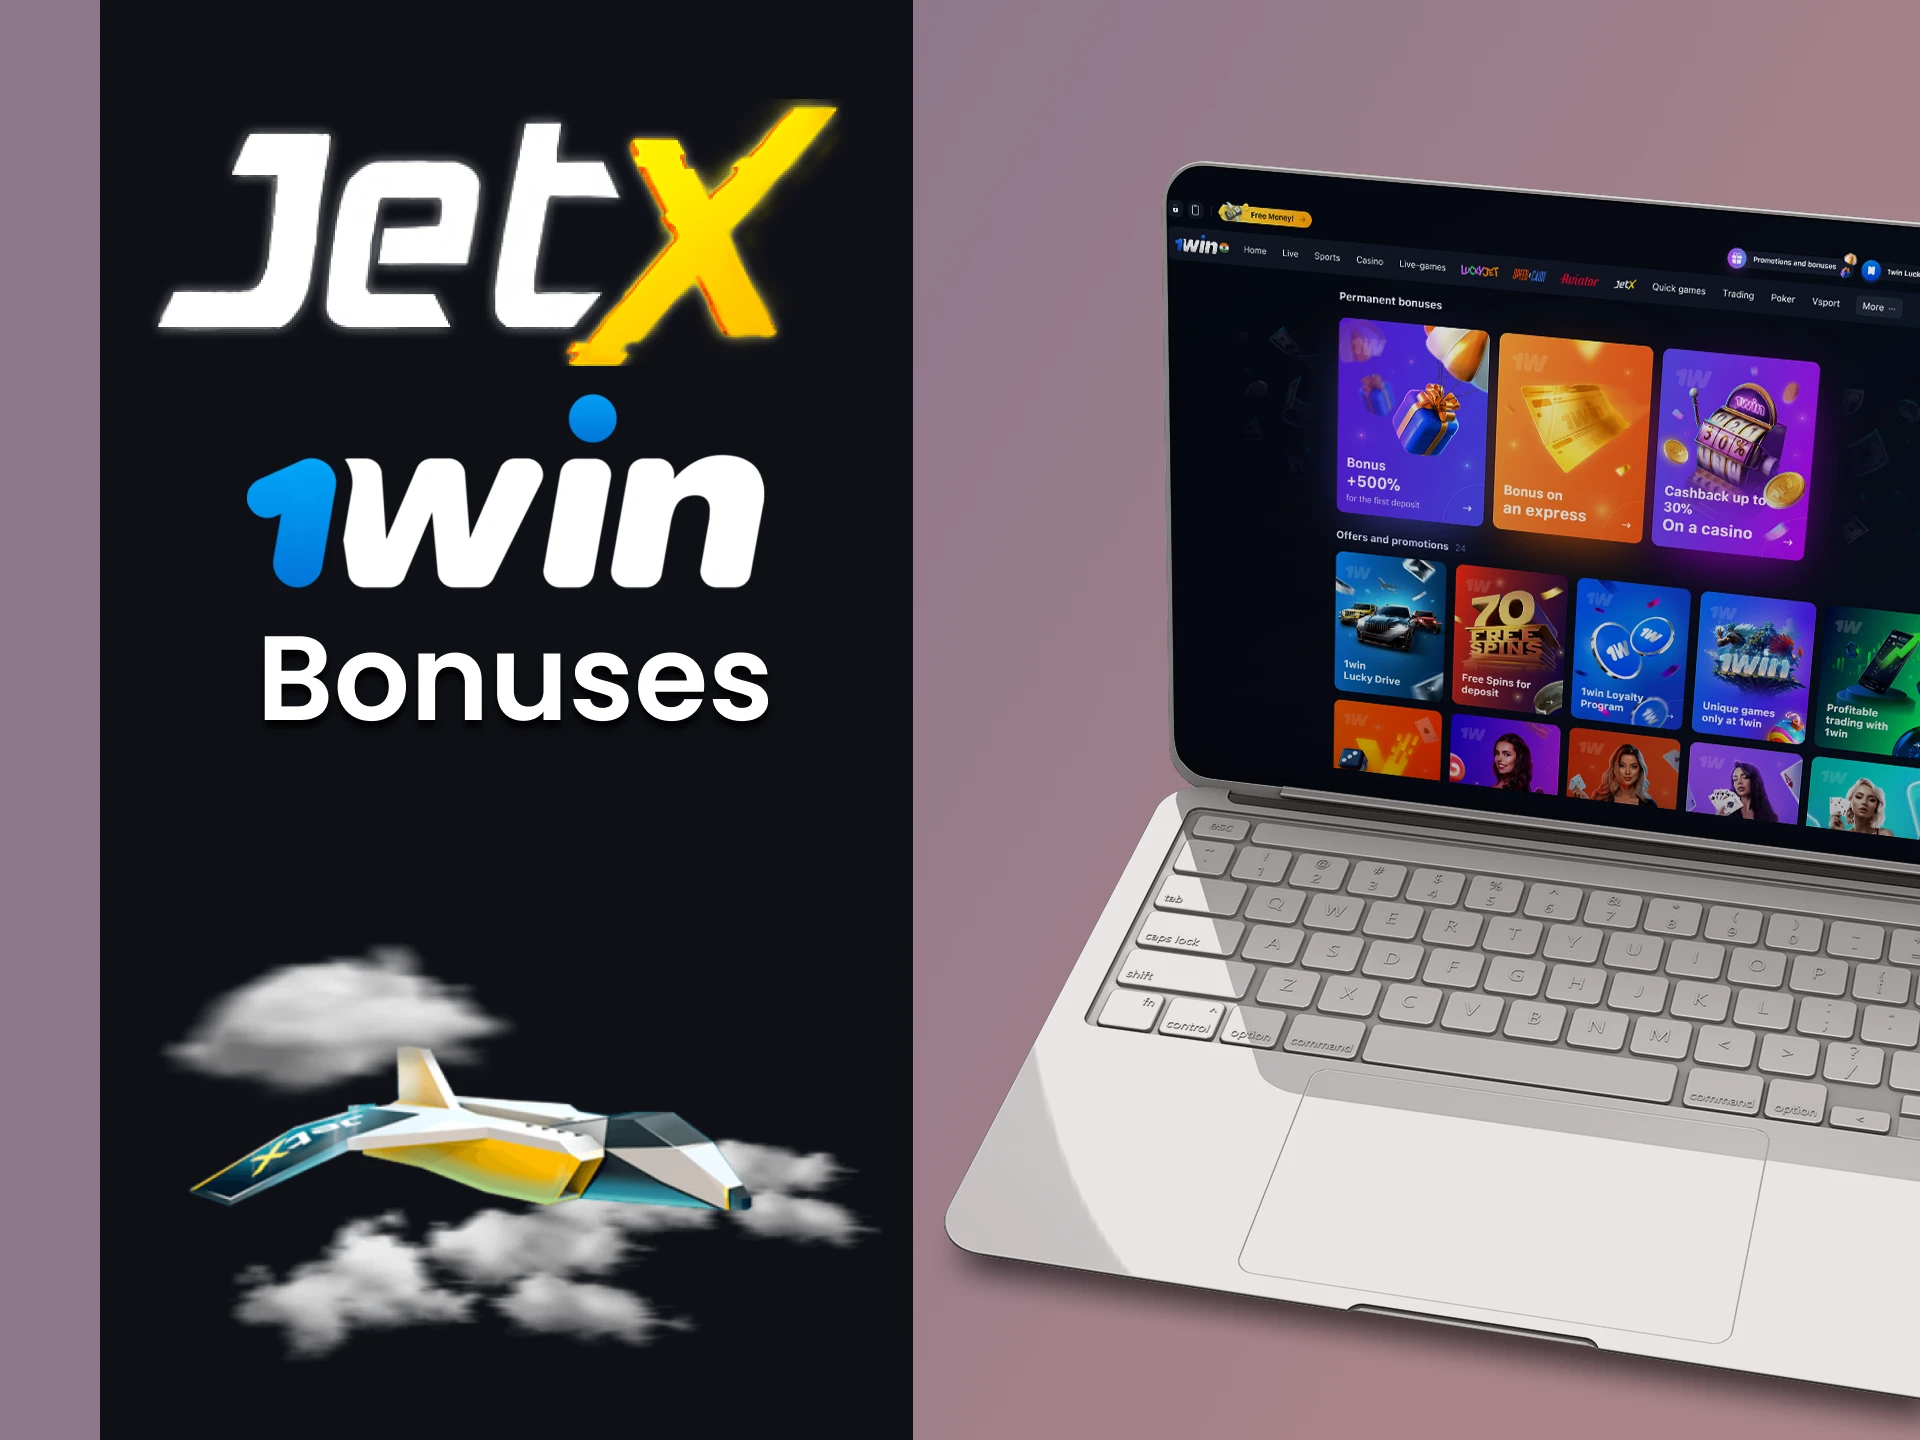 When playing JetX you will receive many bonuses from 1win.